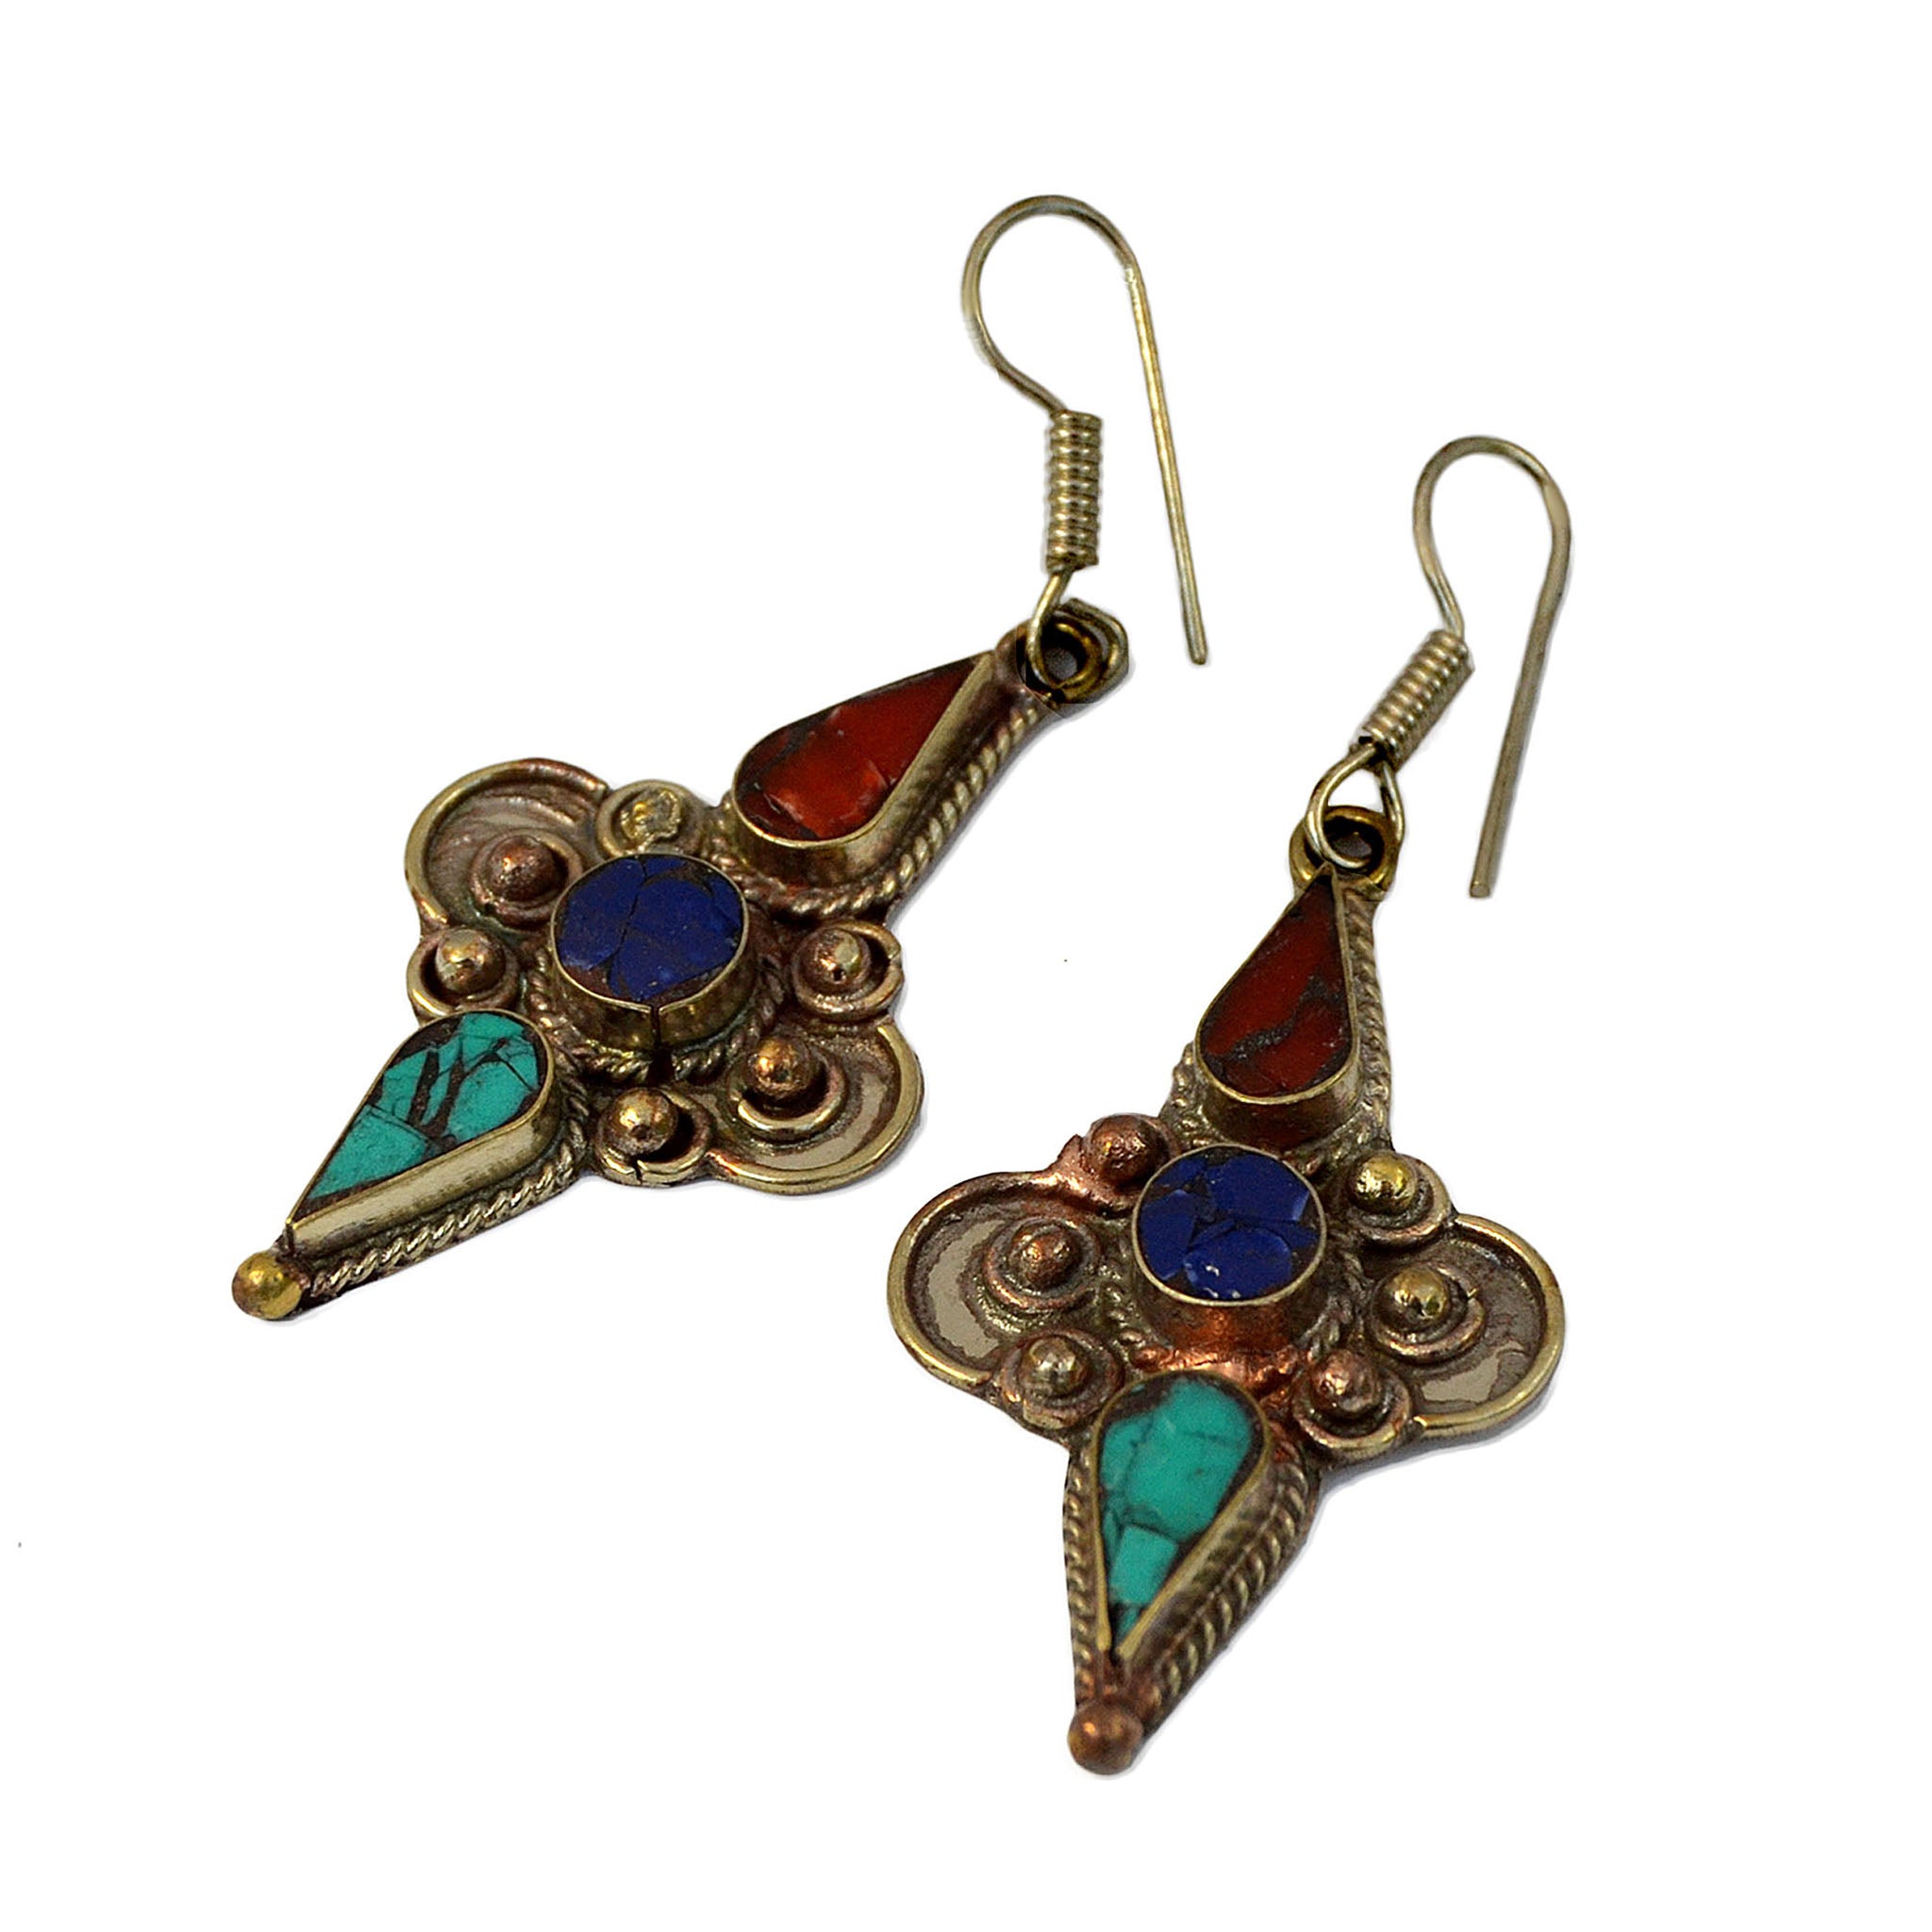 Silver tribal drop earrings with inlay turquoise, lapis lazuli and red coral stones on white 